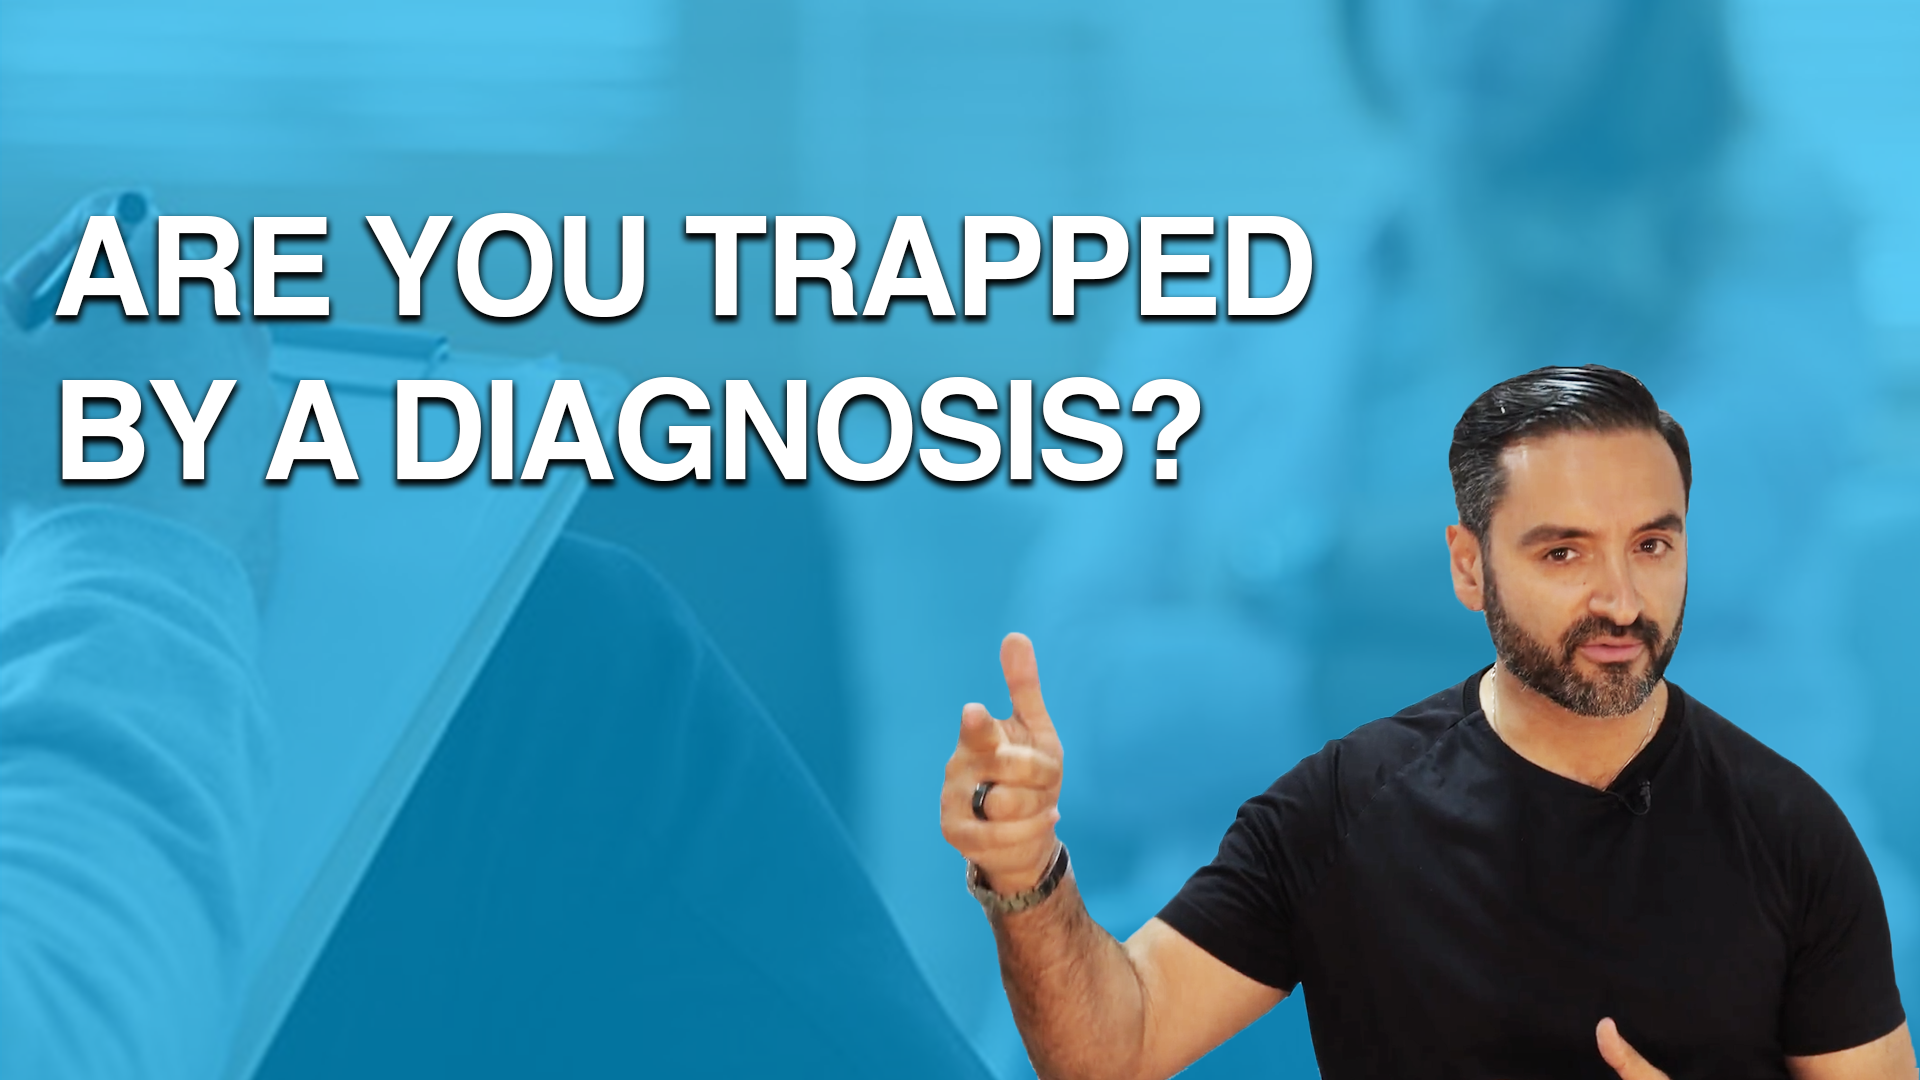 Are You Trapped by a Diagnosis?